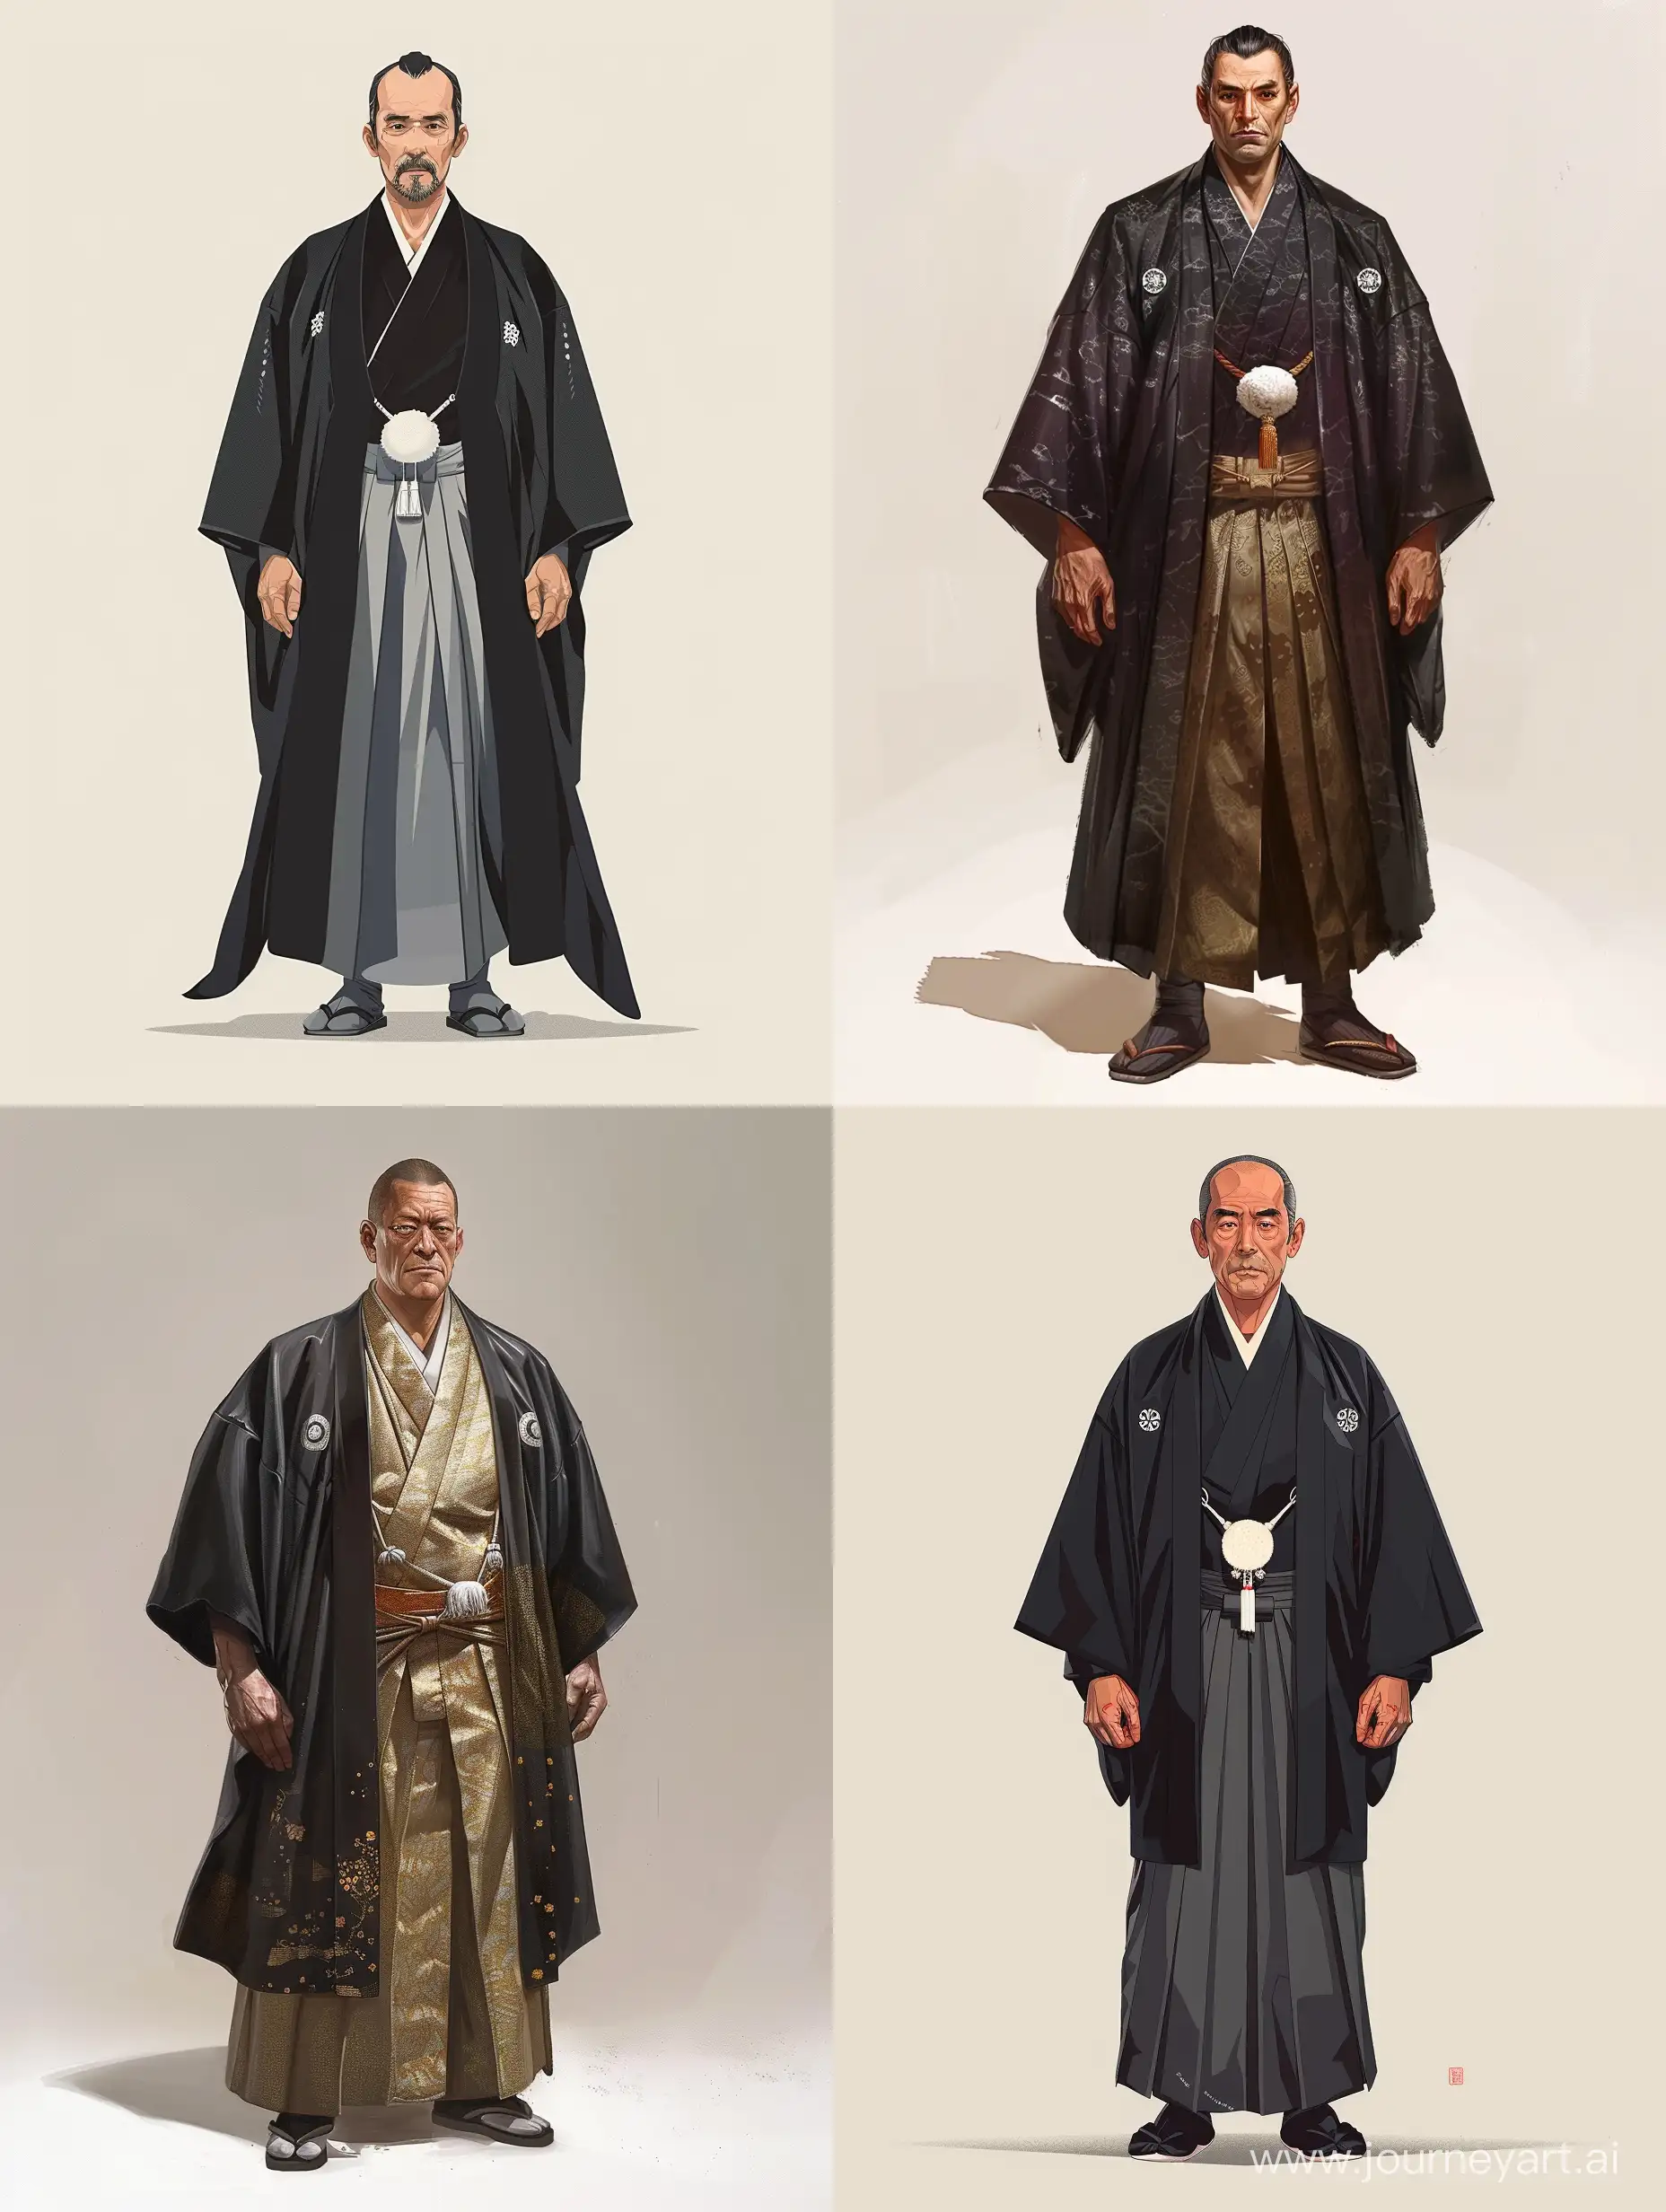 Create a character illustration of a man exuding authority and discipline, dressed in traditional Japanese attire. His posture is upright, reflecting his strict nature. The clothing should be meticulously detailed, showcasing the elegance and complexity of Japanese fashion. The character's facial expression is serious, with a hint of a stern smile, indicating his approachable yet uncompromising personality. The background is minimalistic, emphasizing the character's presence. The art style is hyperrealistic, with a focus on capturing the textures of the fabric and the subtle nuances of the character's demeanor. This piece should resonate with the themes of tradition, discipline, and authority, making it a captivating and thought-provoking artwork